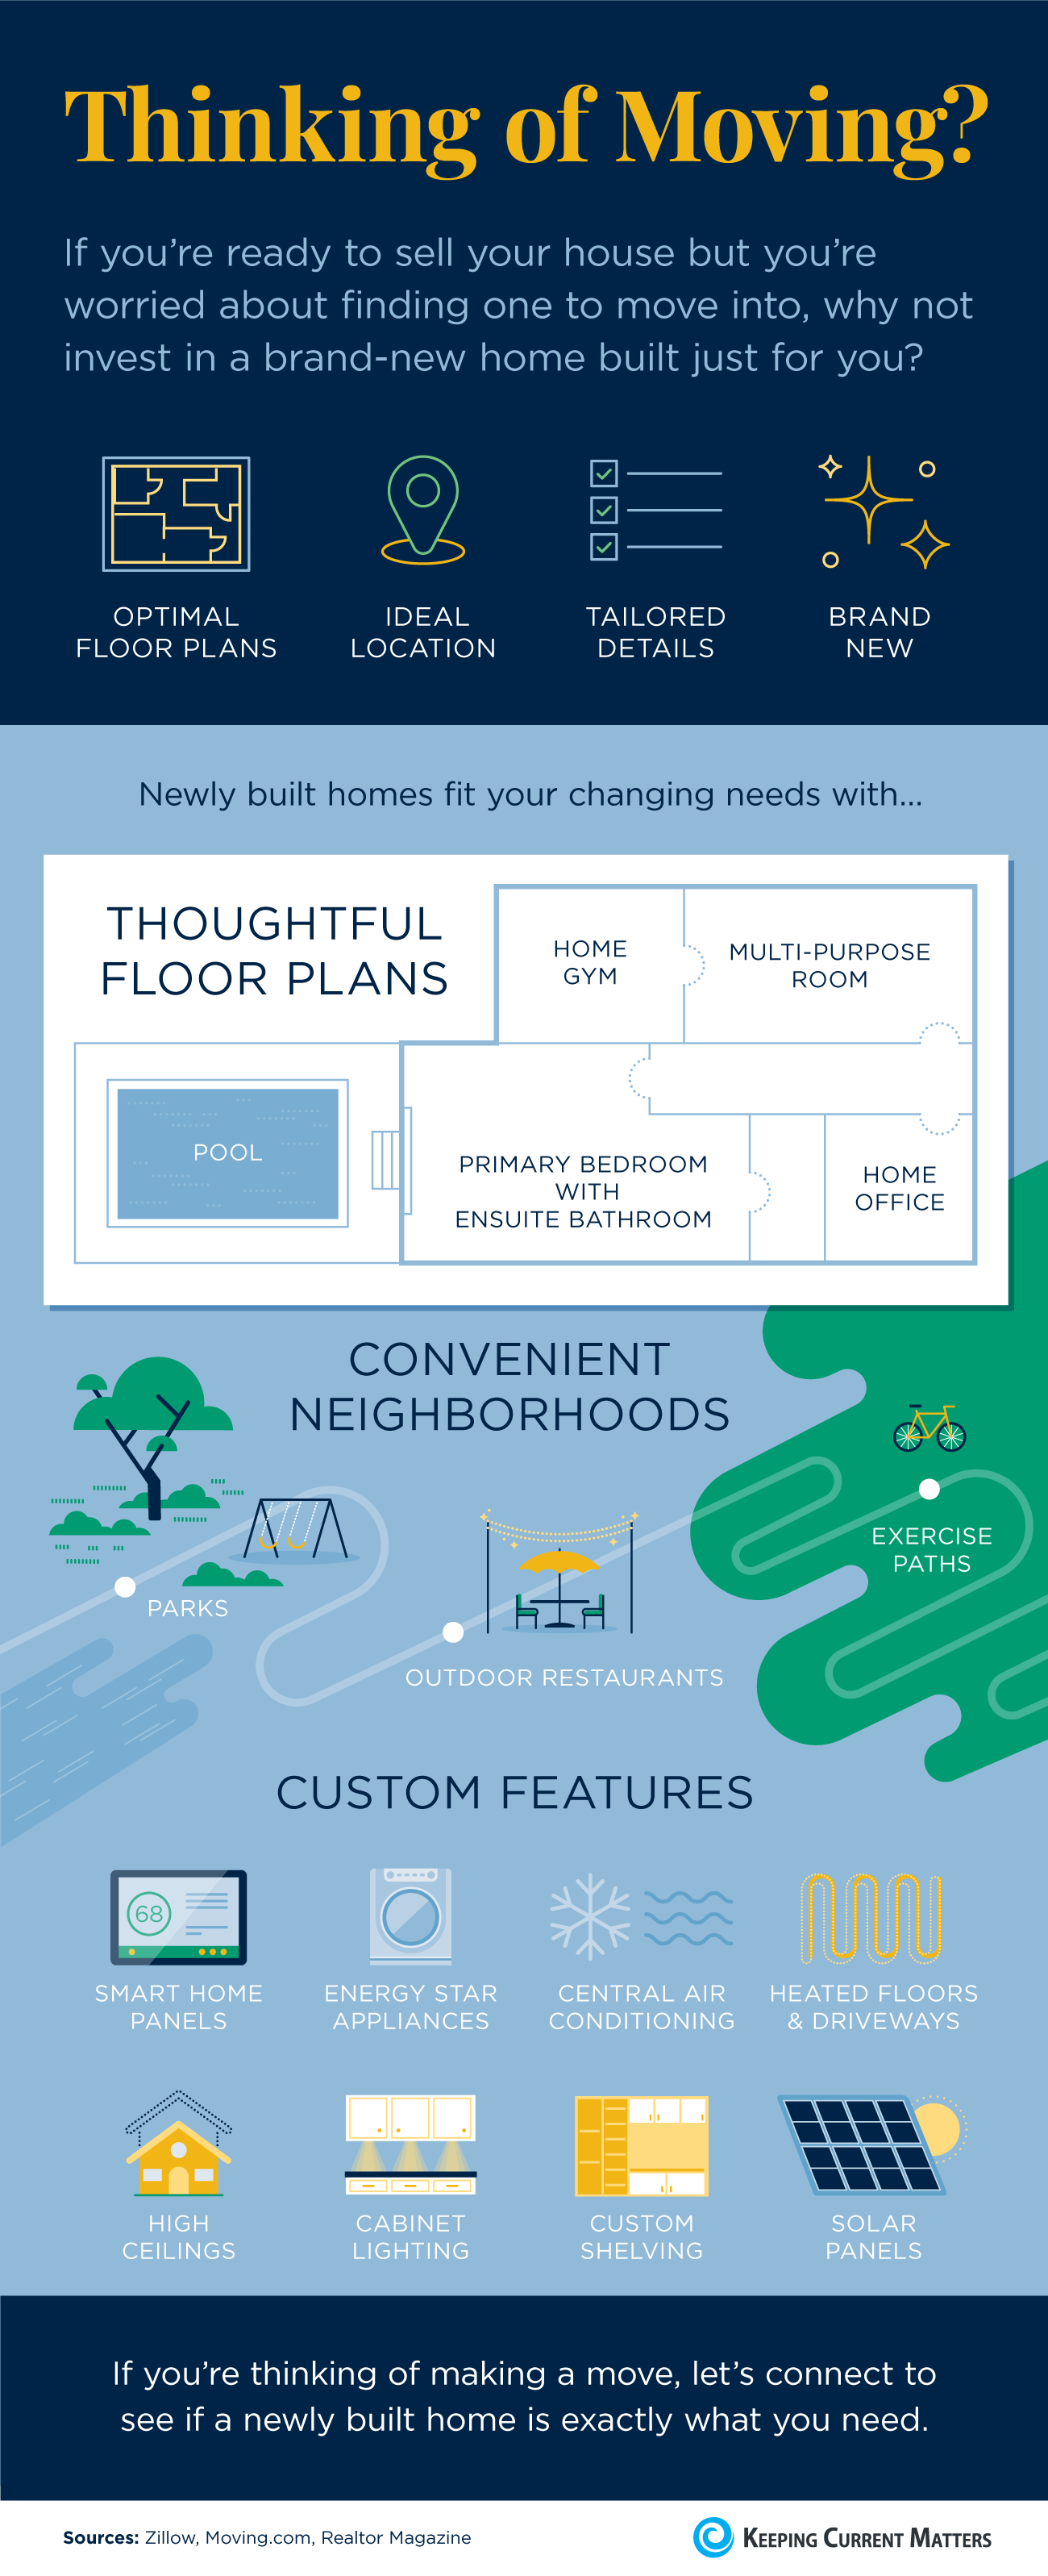 Thinking of Moving? [INFOGRAPHIC] | Keeping Current Matters